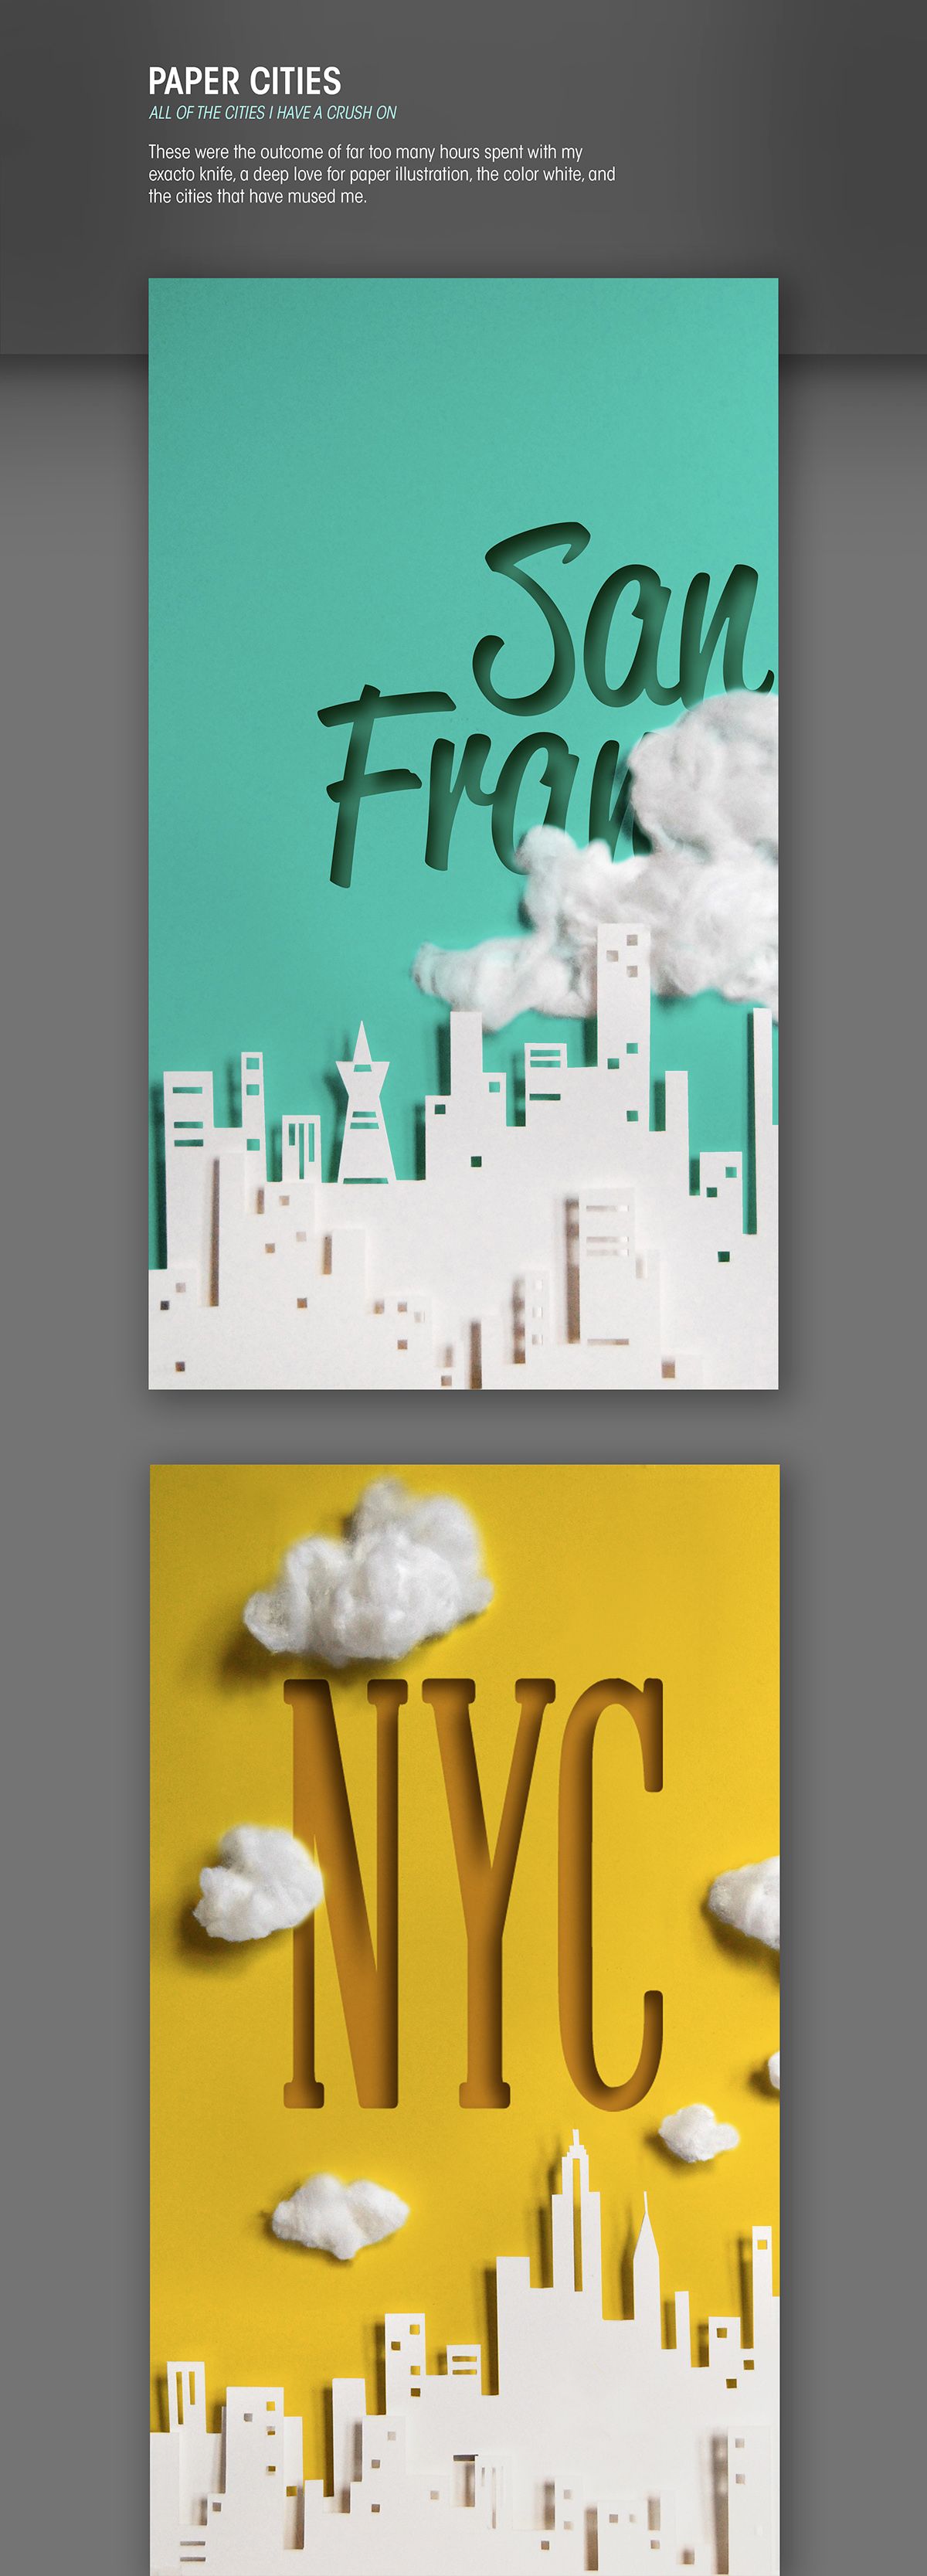 paper New York san francisco chicago White cut paper Paper Illustration Cities type clouds paper cities Ali Prater white on white clean simple